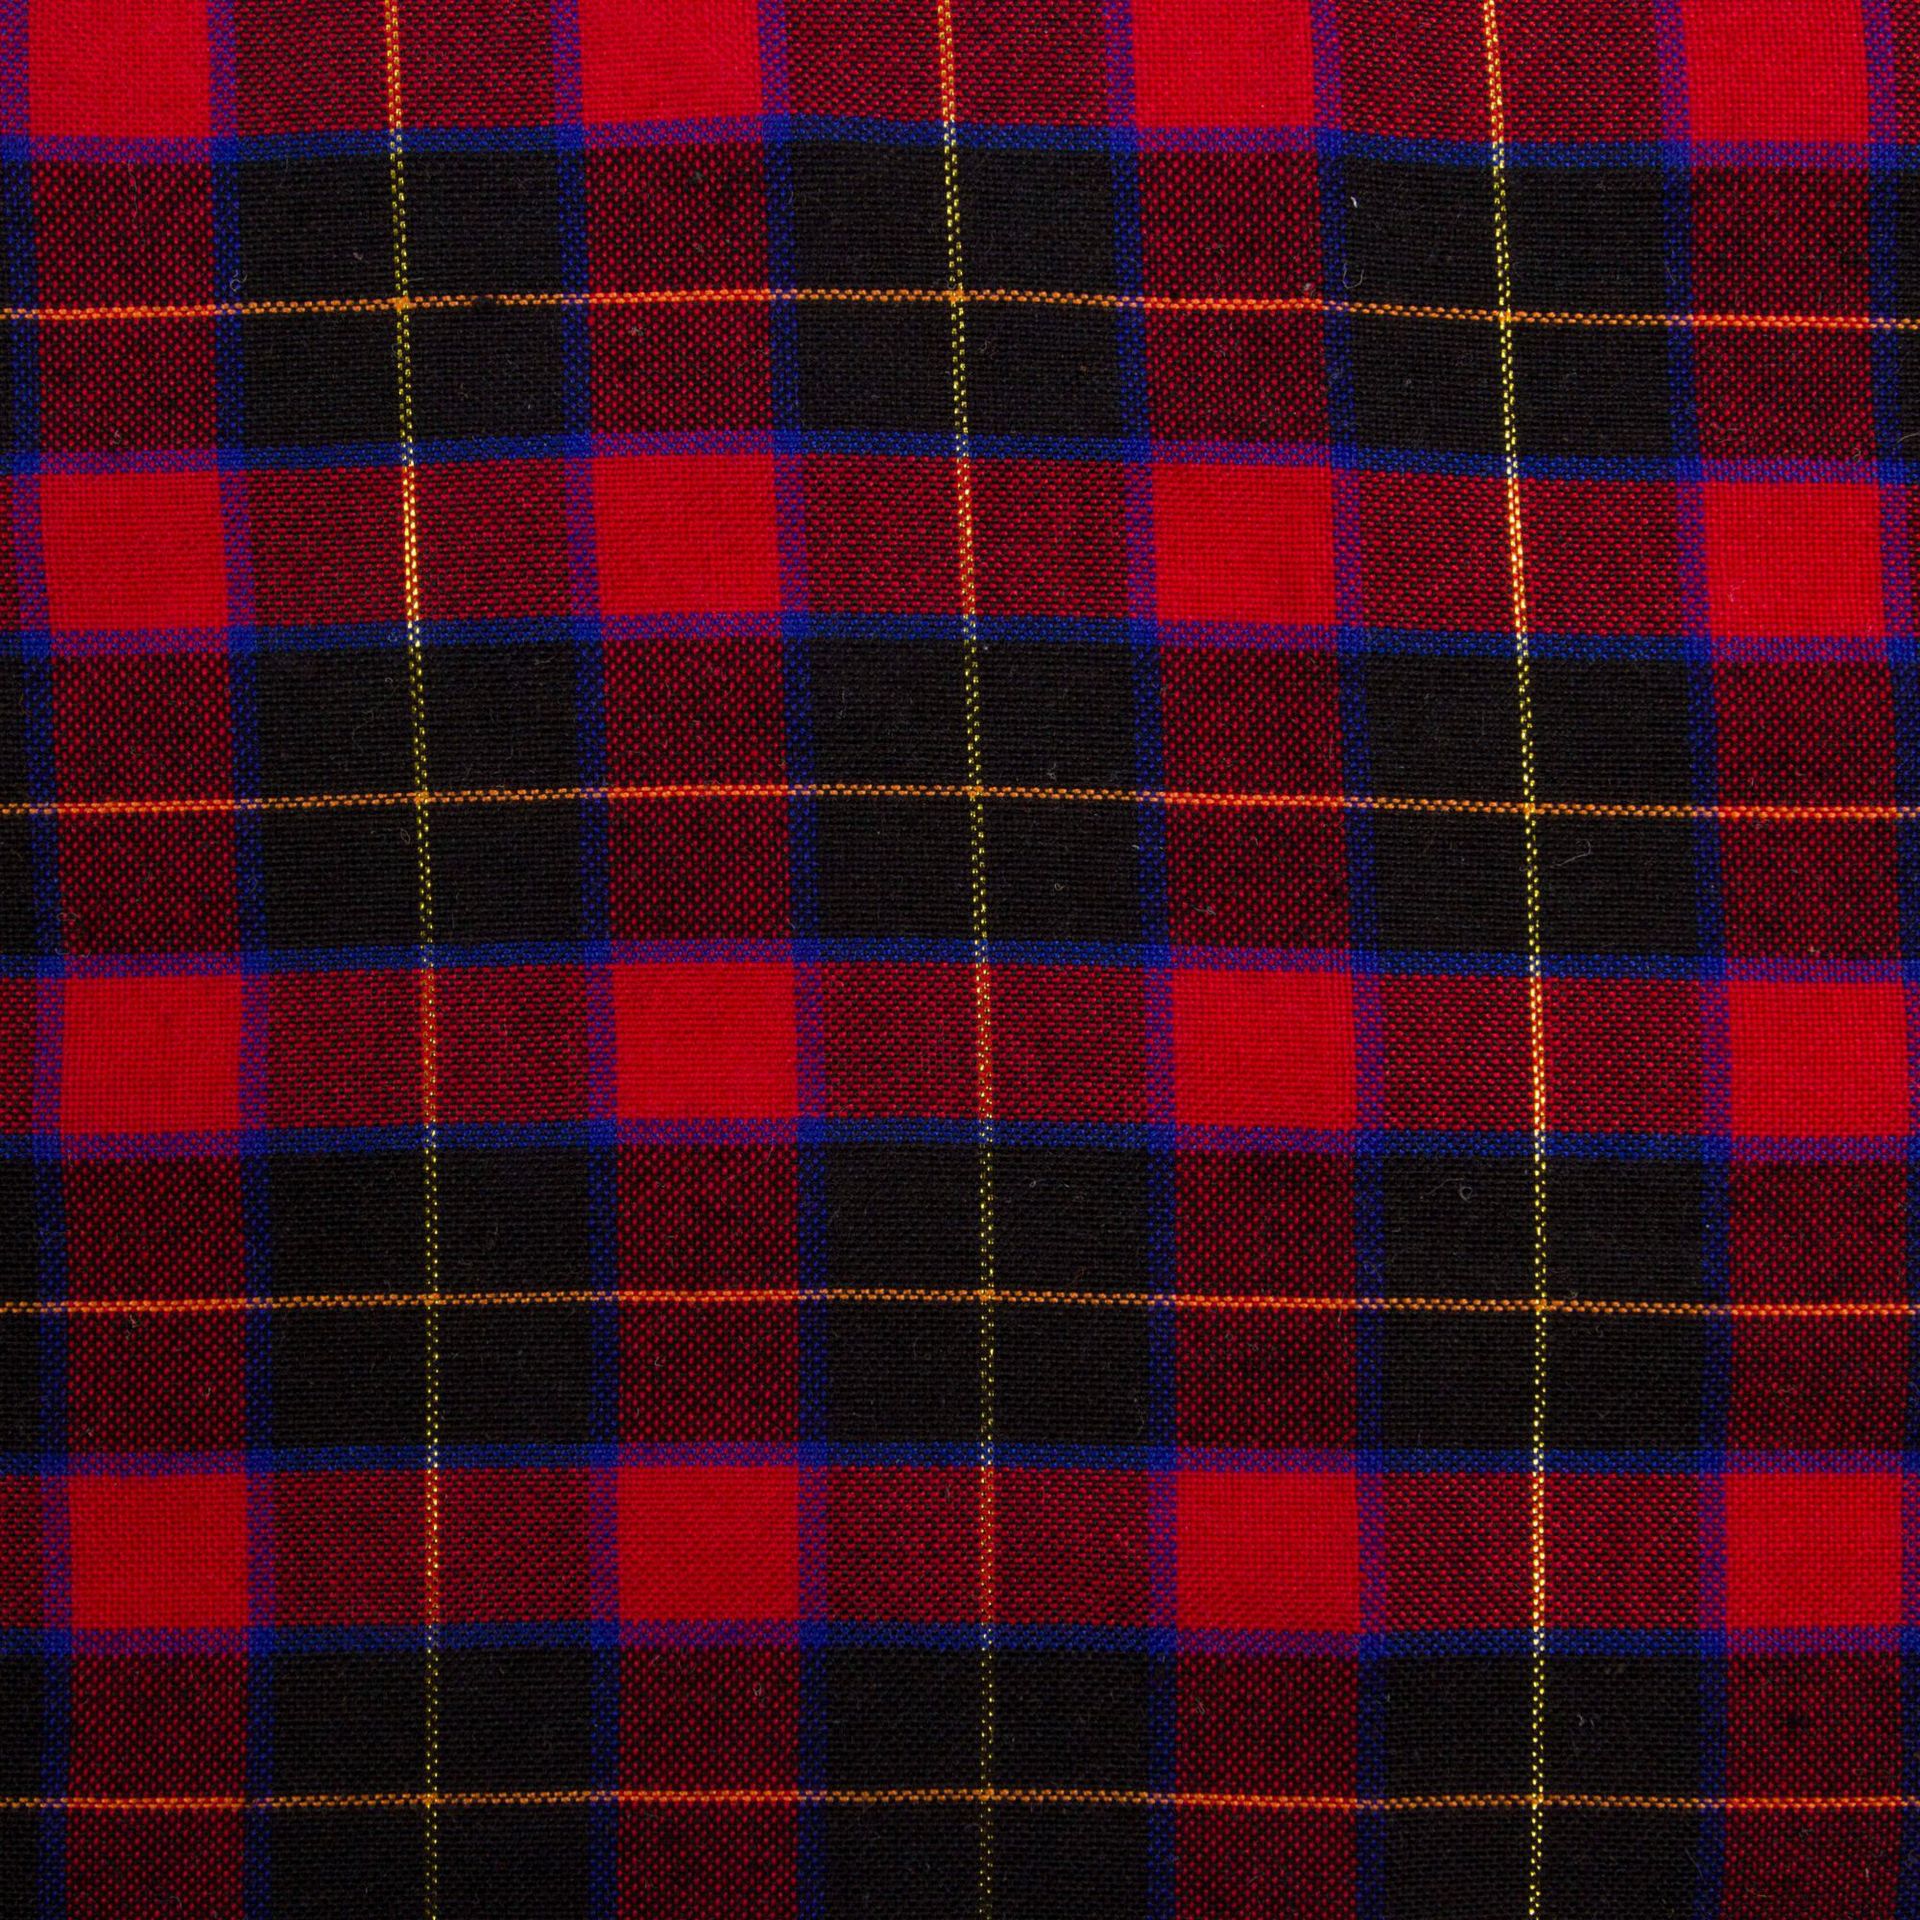 Gold and Silver Yarn-Dyed Shirt's Fabric Plaid Clothing Fabric Can Be Sample Production and Processing Price Can Be Discussed